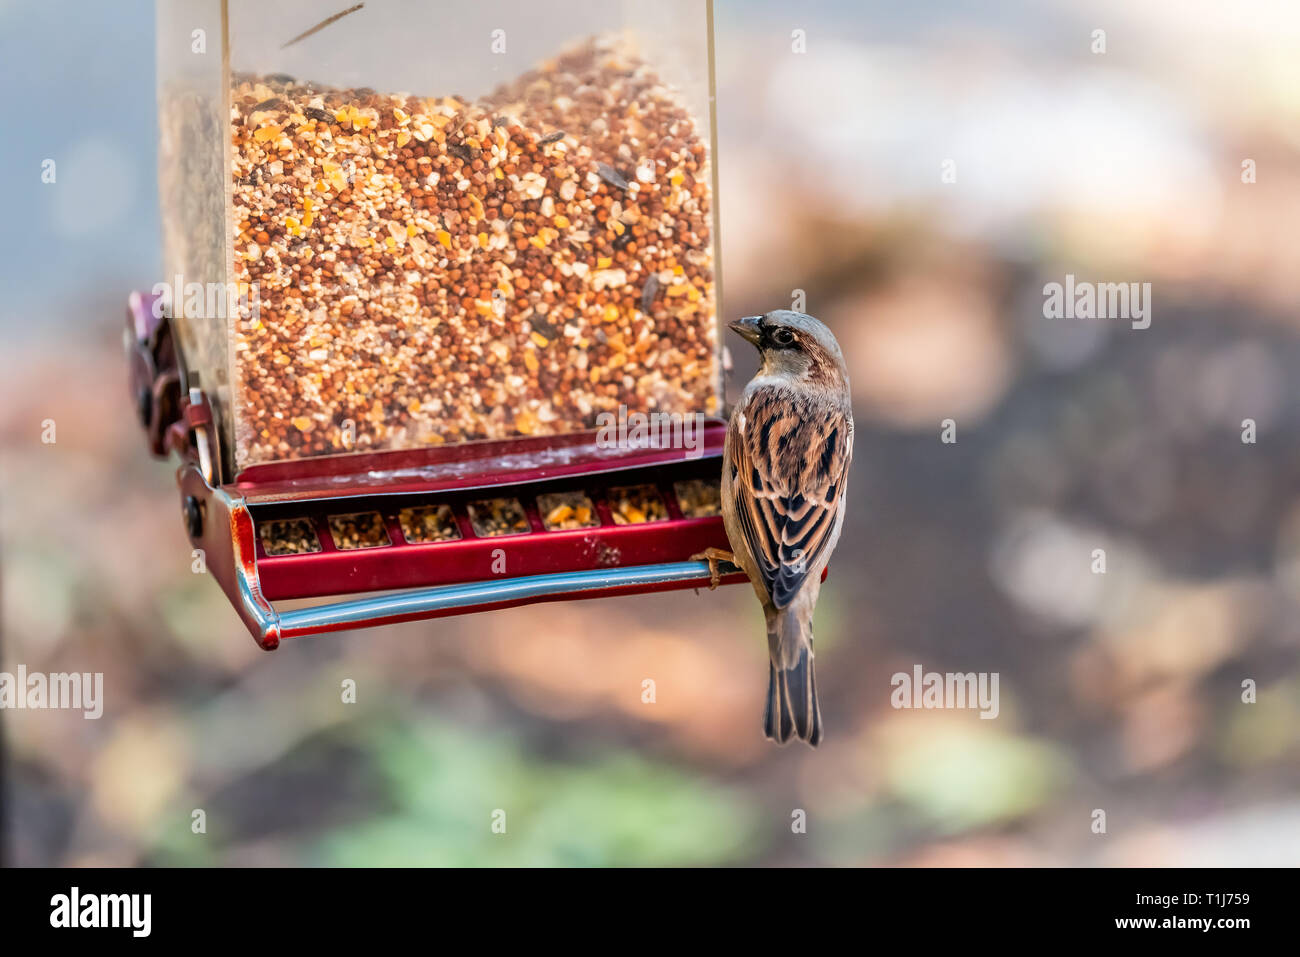 Closeup of one house sparrow bird perched on plastic feeder eating feed millet seeds outside in hanging garden bokeh background Stock Photo